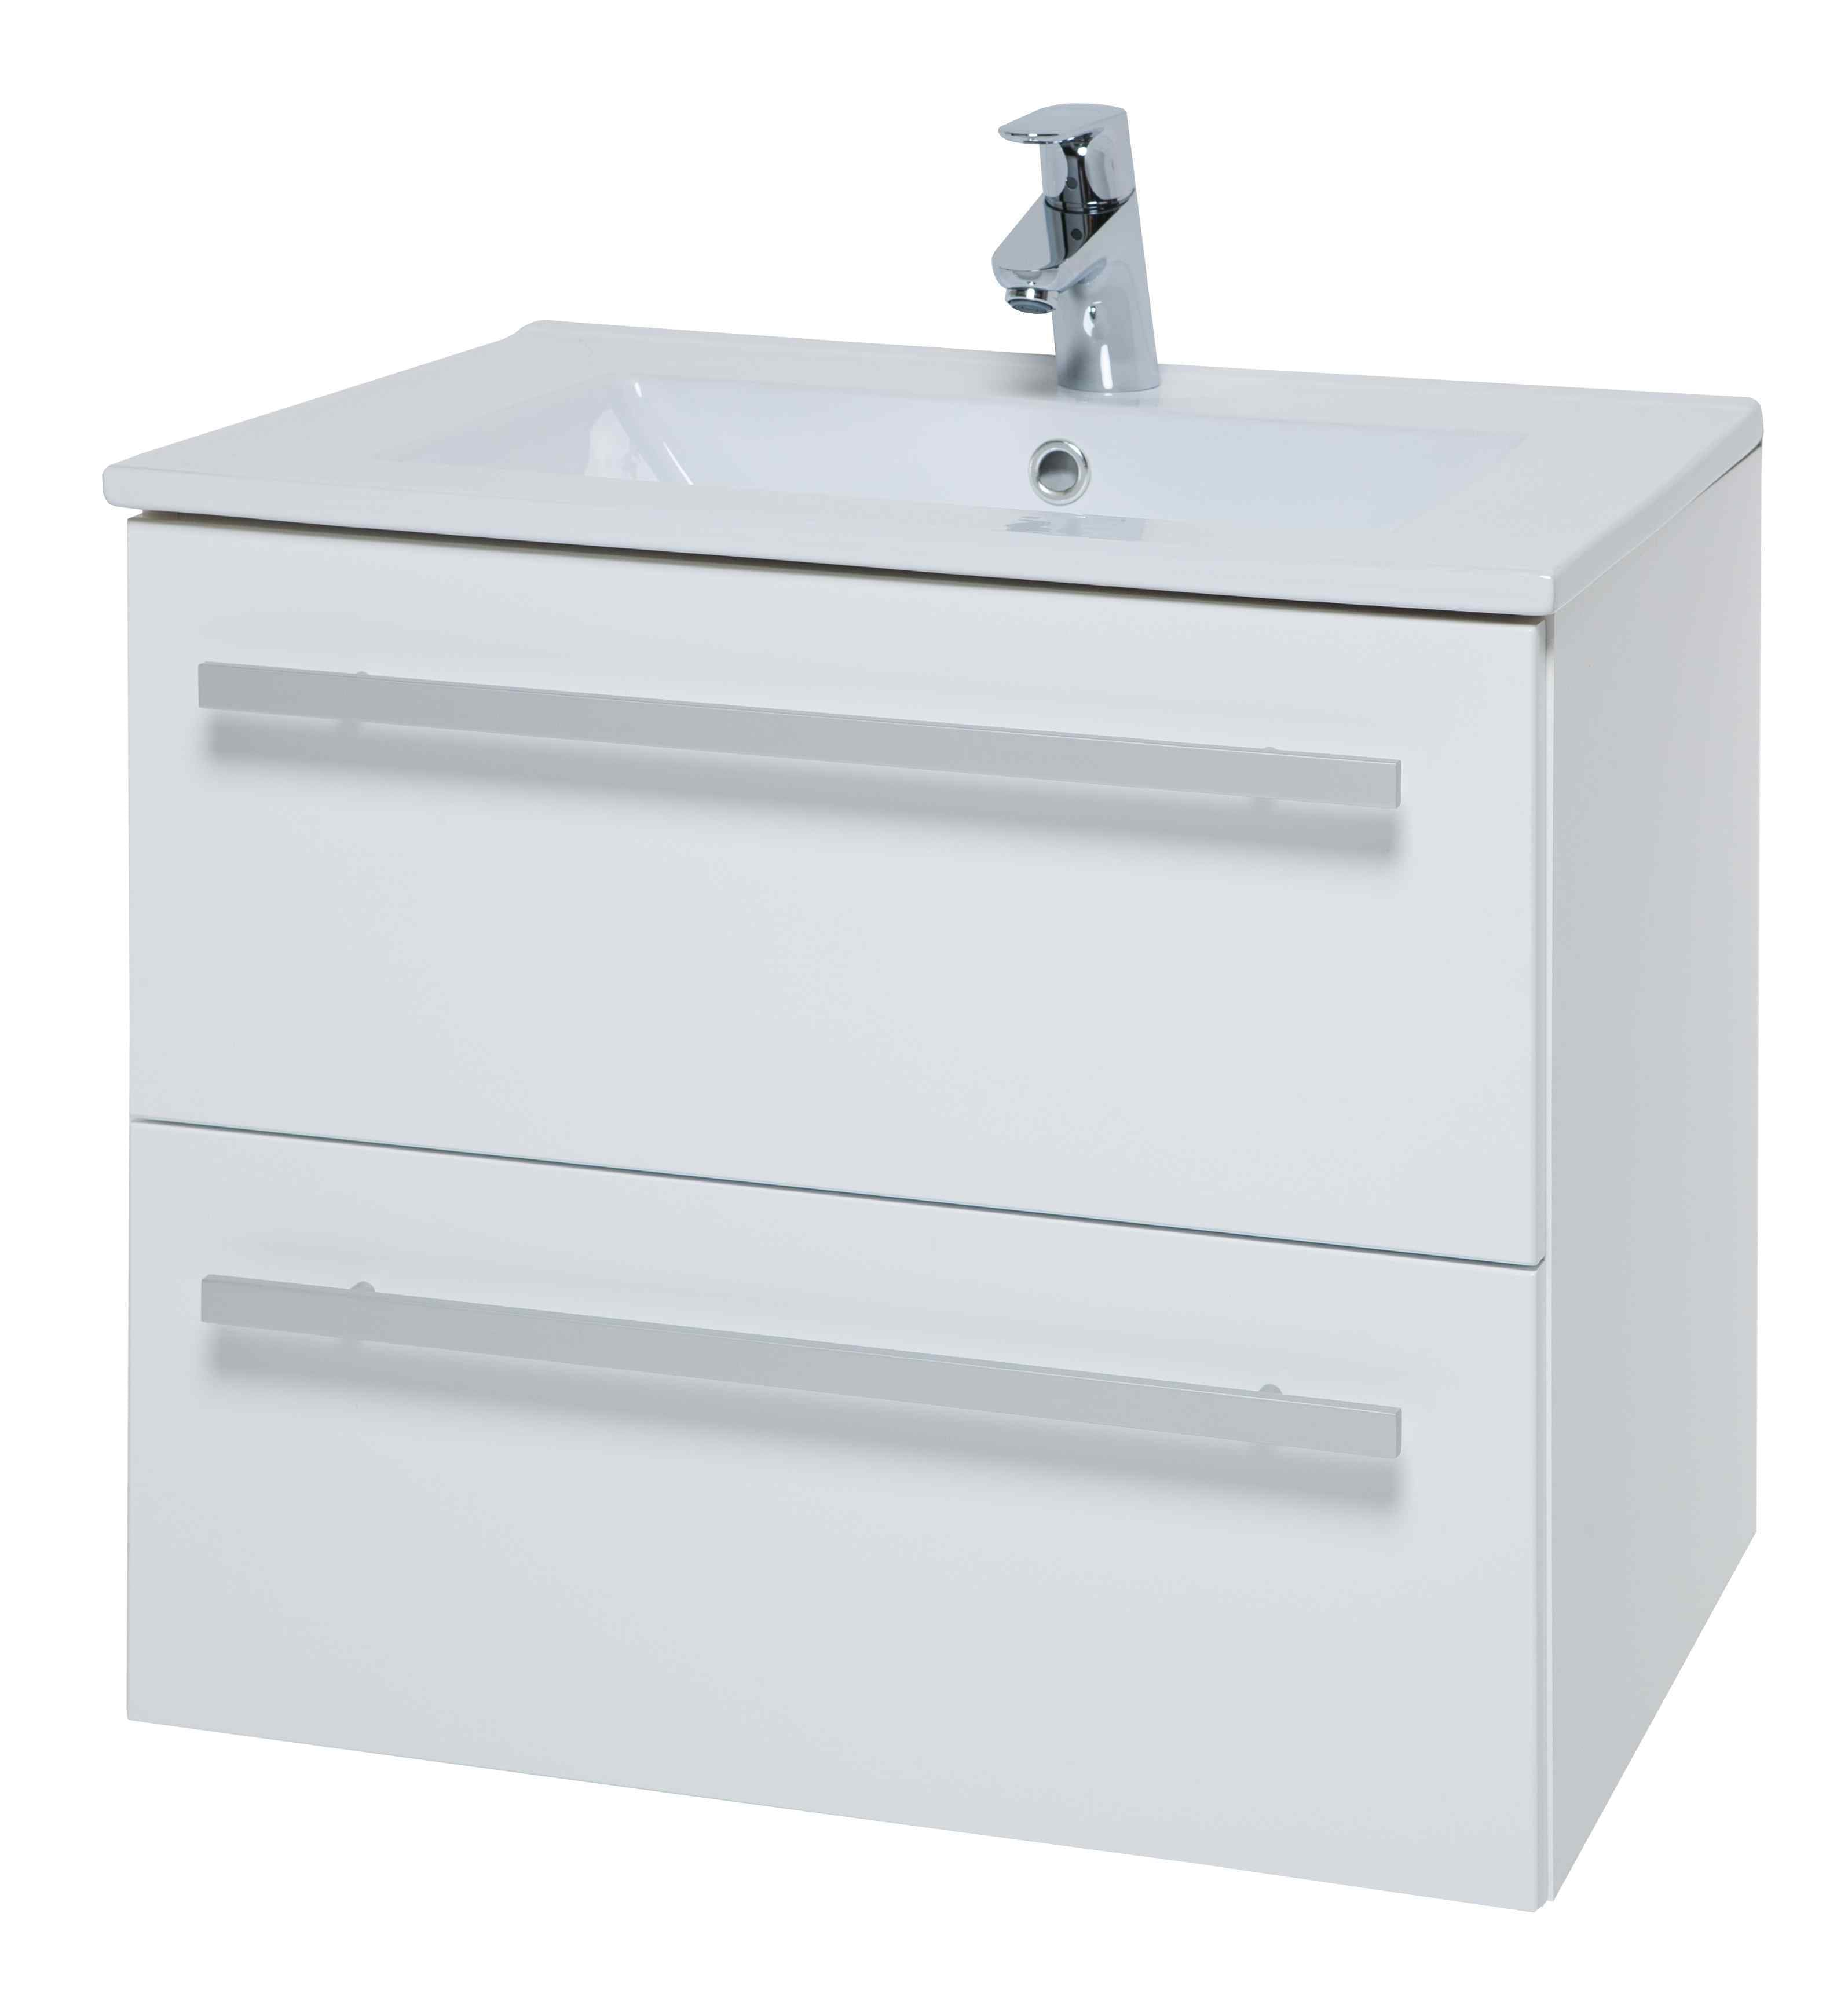 Purity White Gloss Bathroom Suite: Vanity Unit with Basin and Toilet - Best Selection